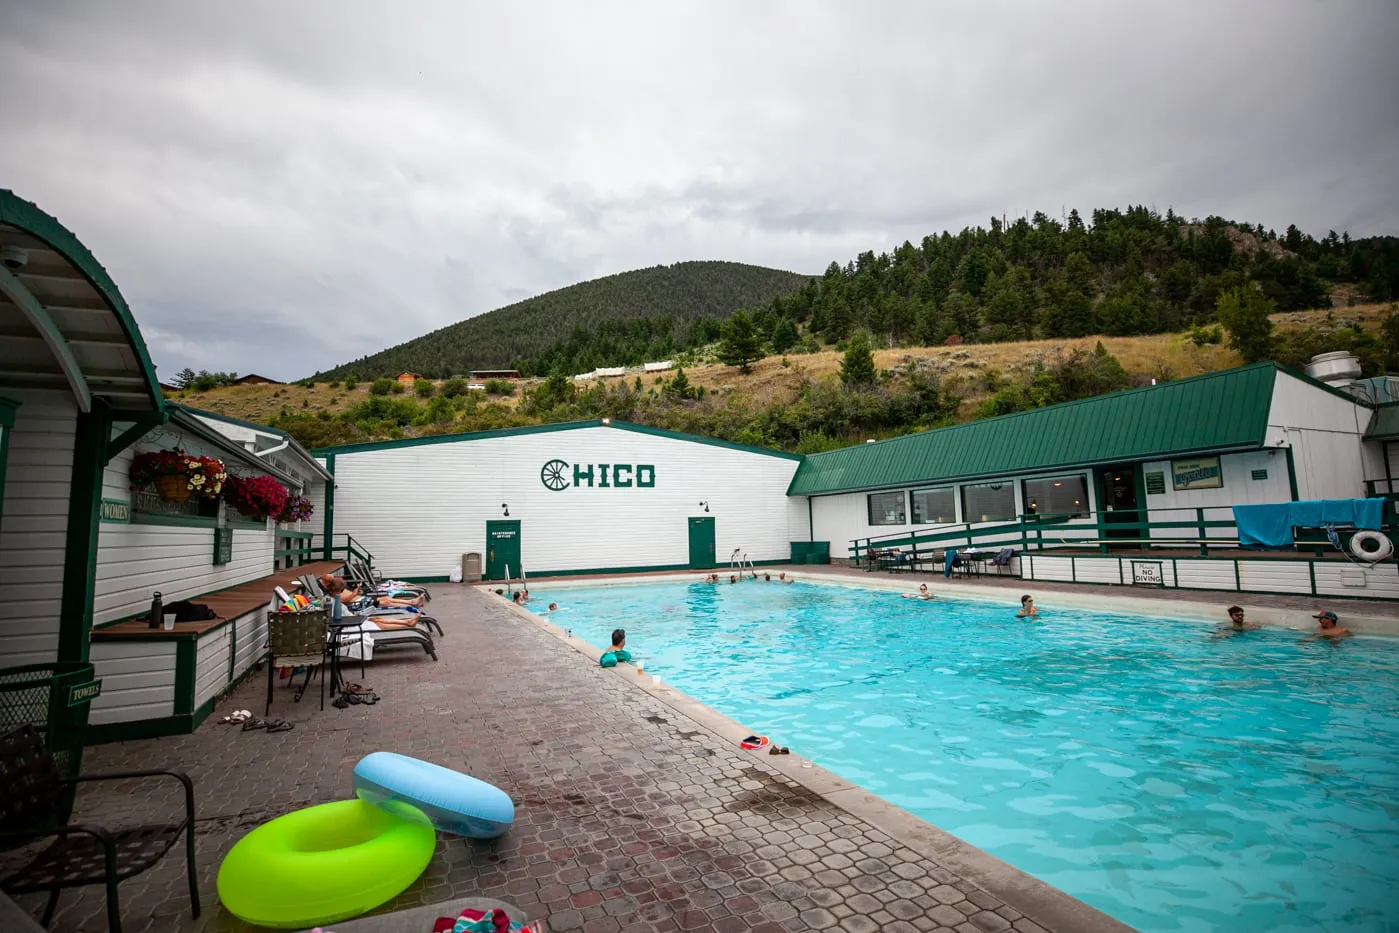 Chico Hot Springs Resort and Day Spa in Montana | Montana Road trip stop near Yellowstone National Park